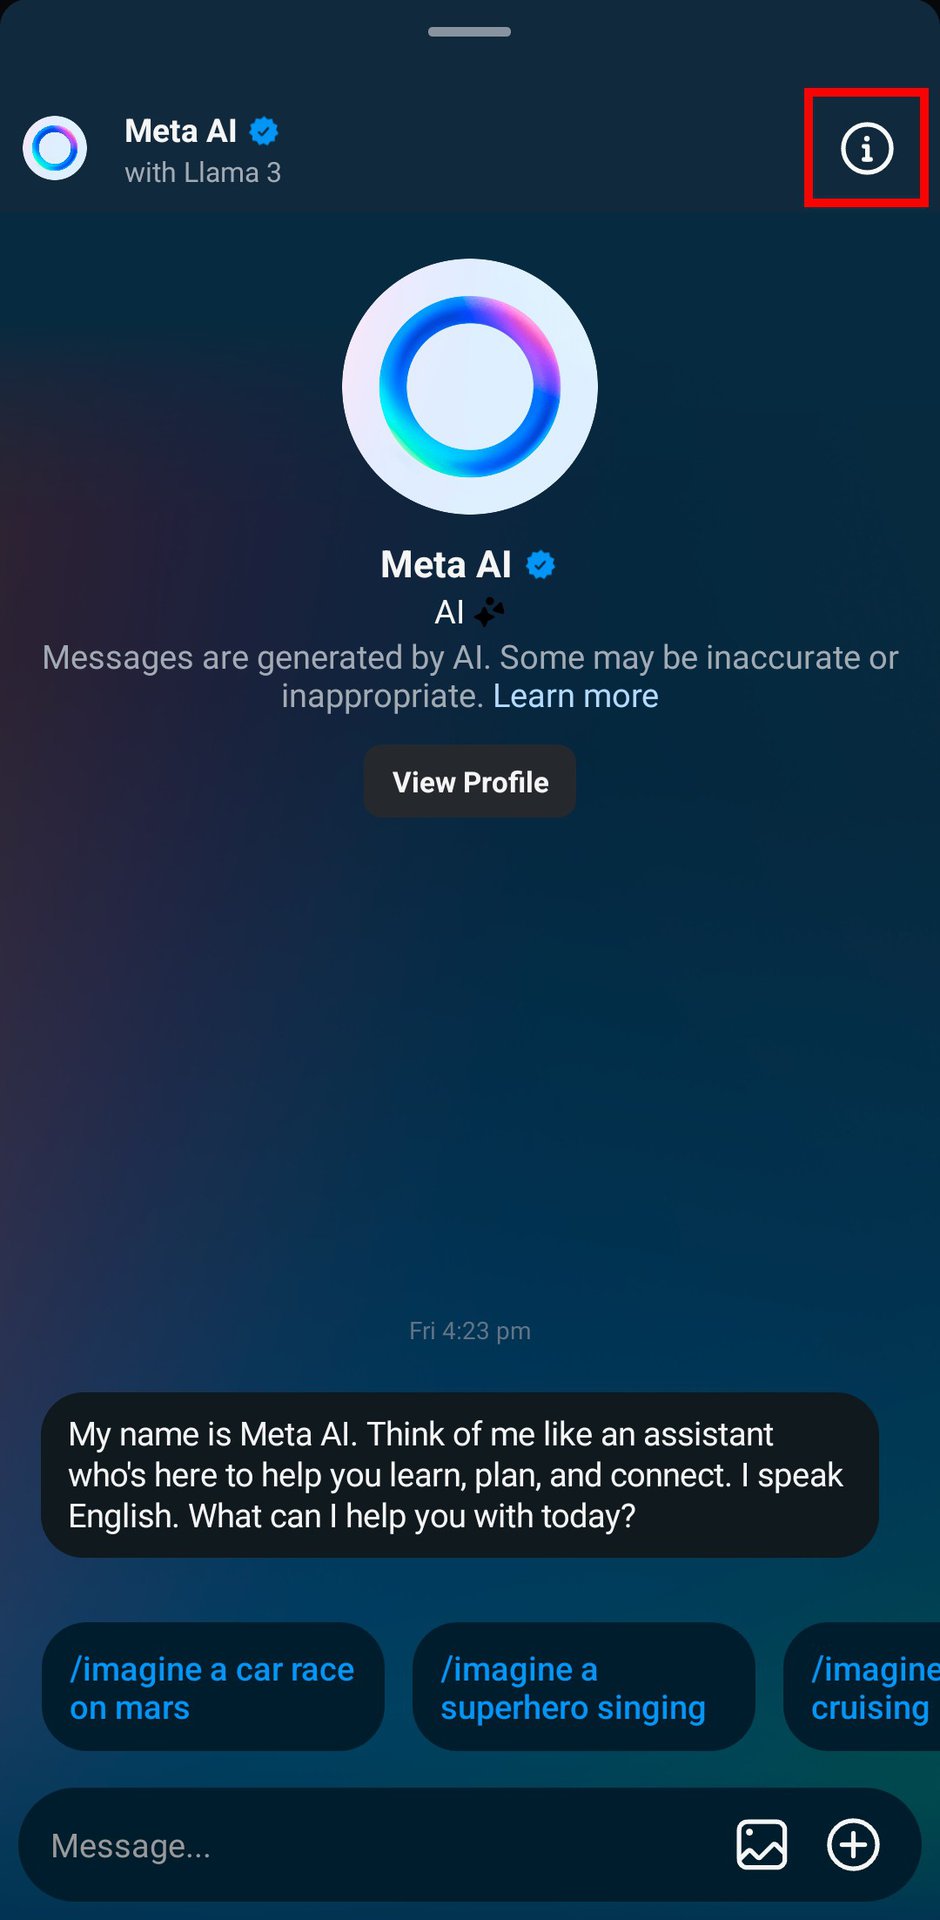 Instagram Meta AI chat page